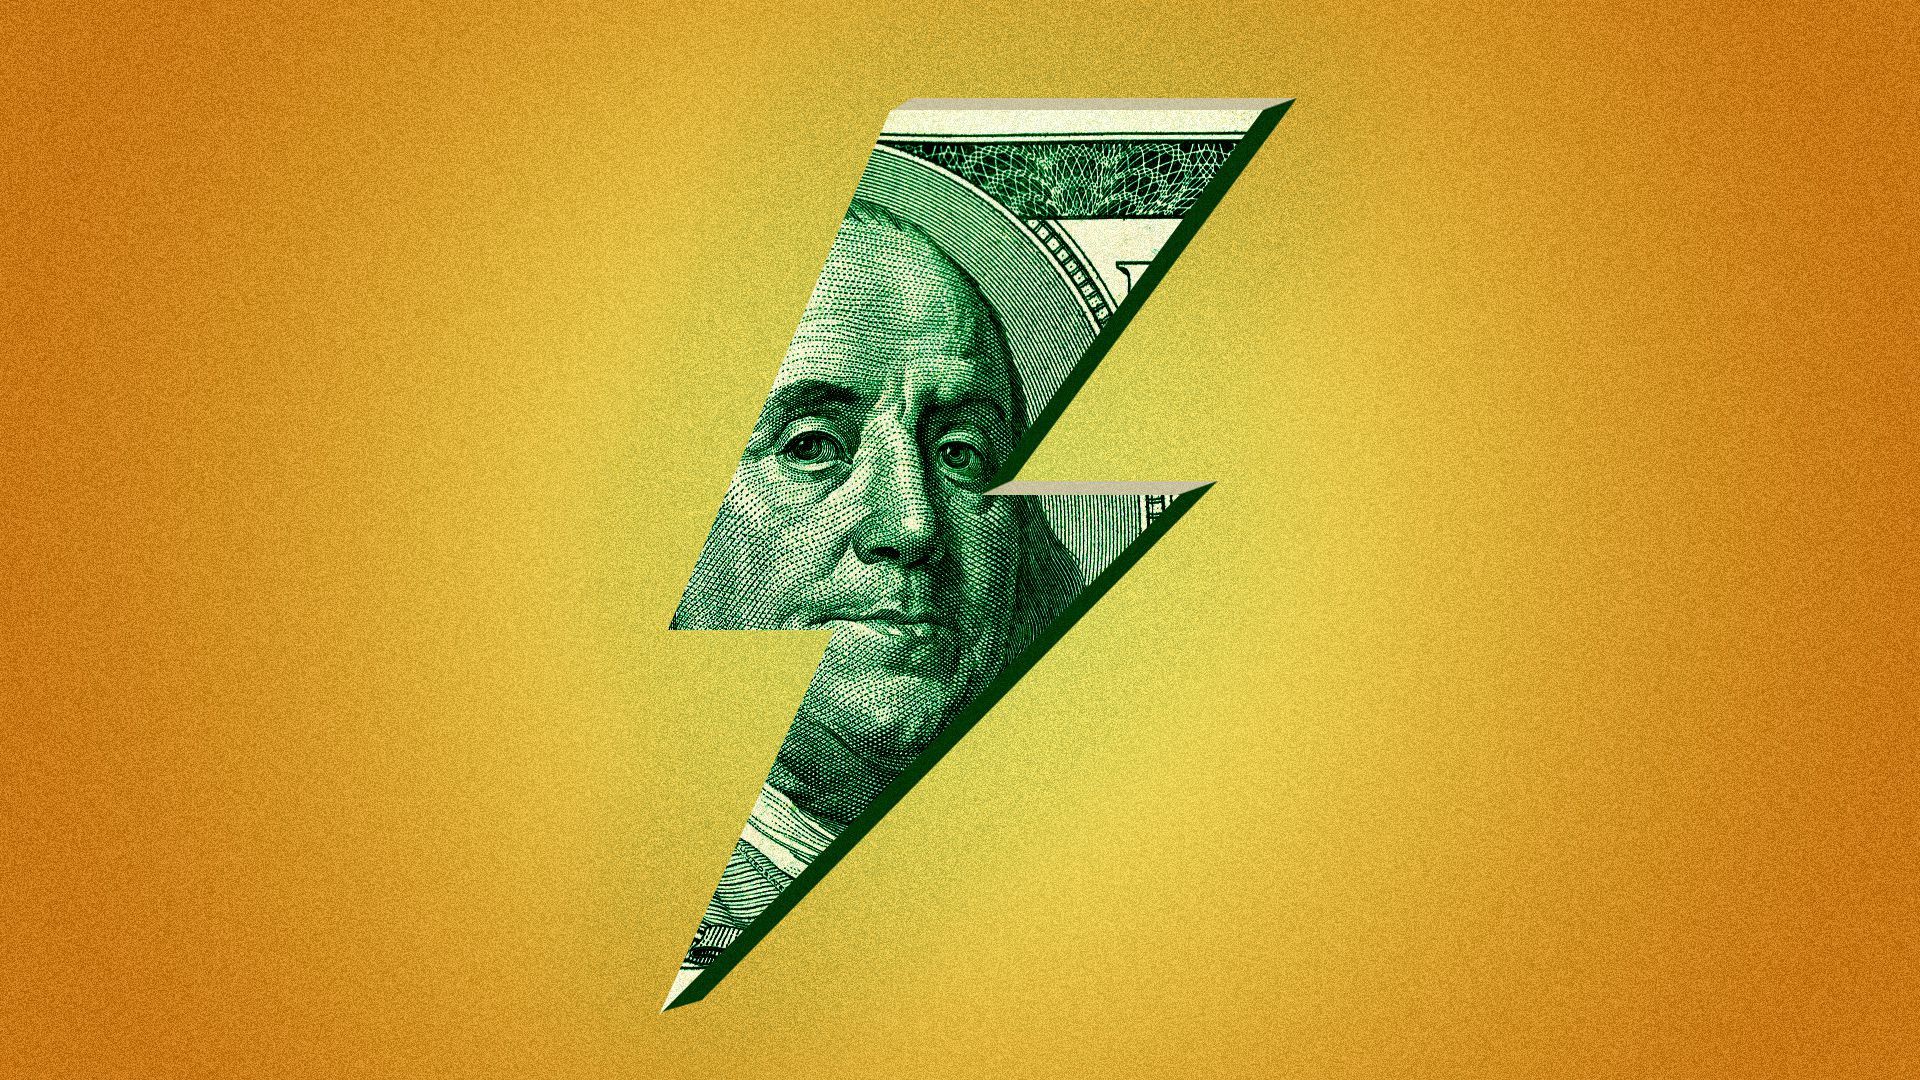 Illustration of a hundred dollar bill stylized as an electric symbol.